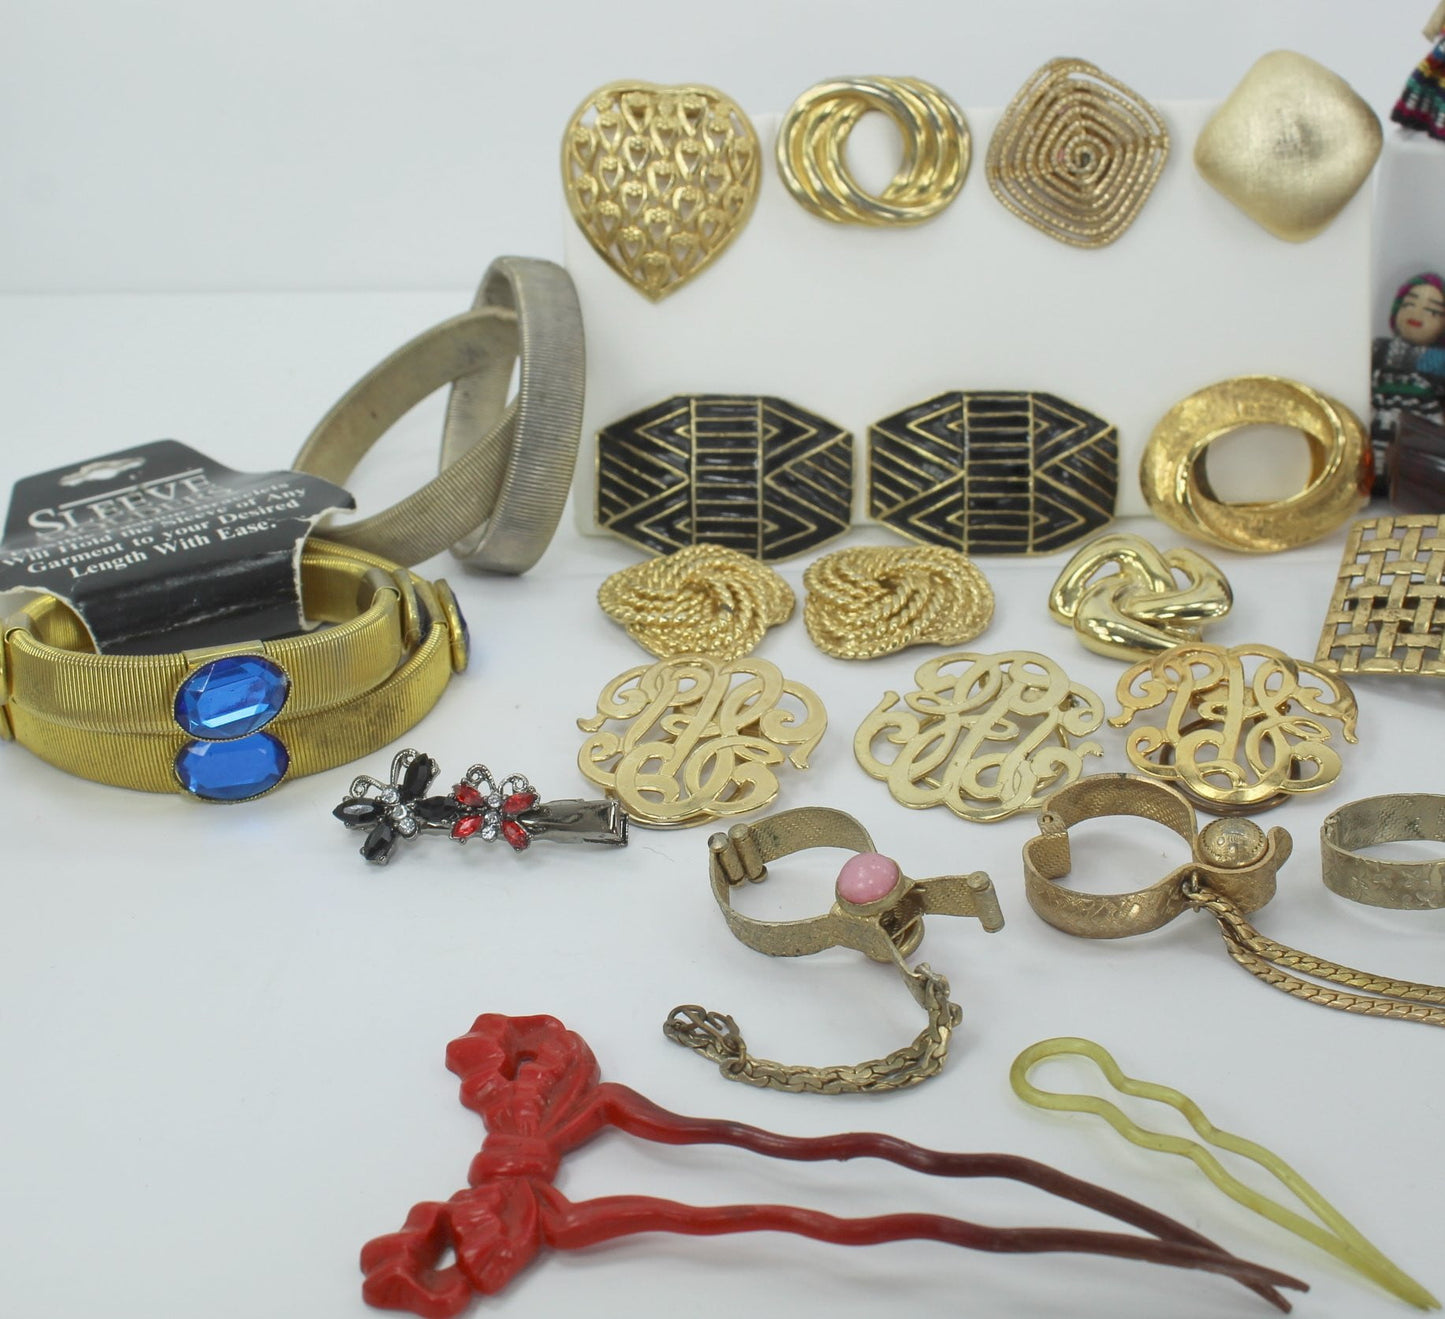 Vintage Accessories Lot 28 Pieces Hair Decor Purse Holders Shoe Dress Clips Sleeve Holders now